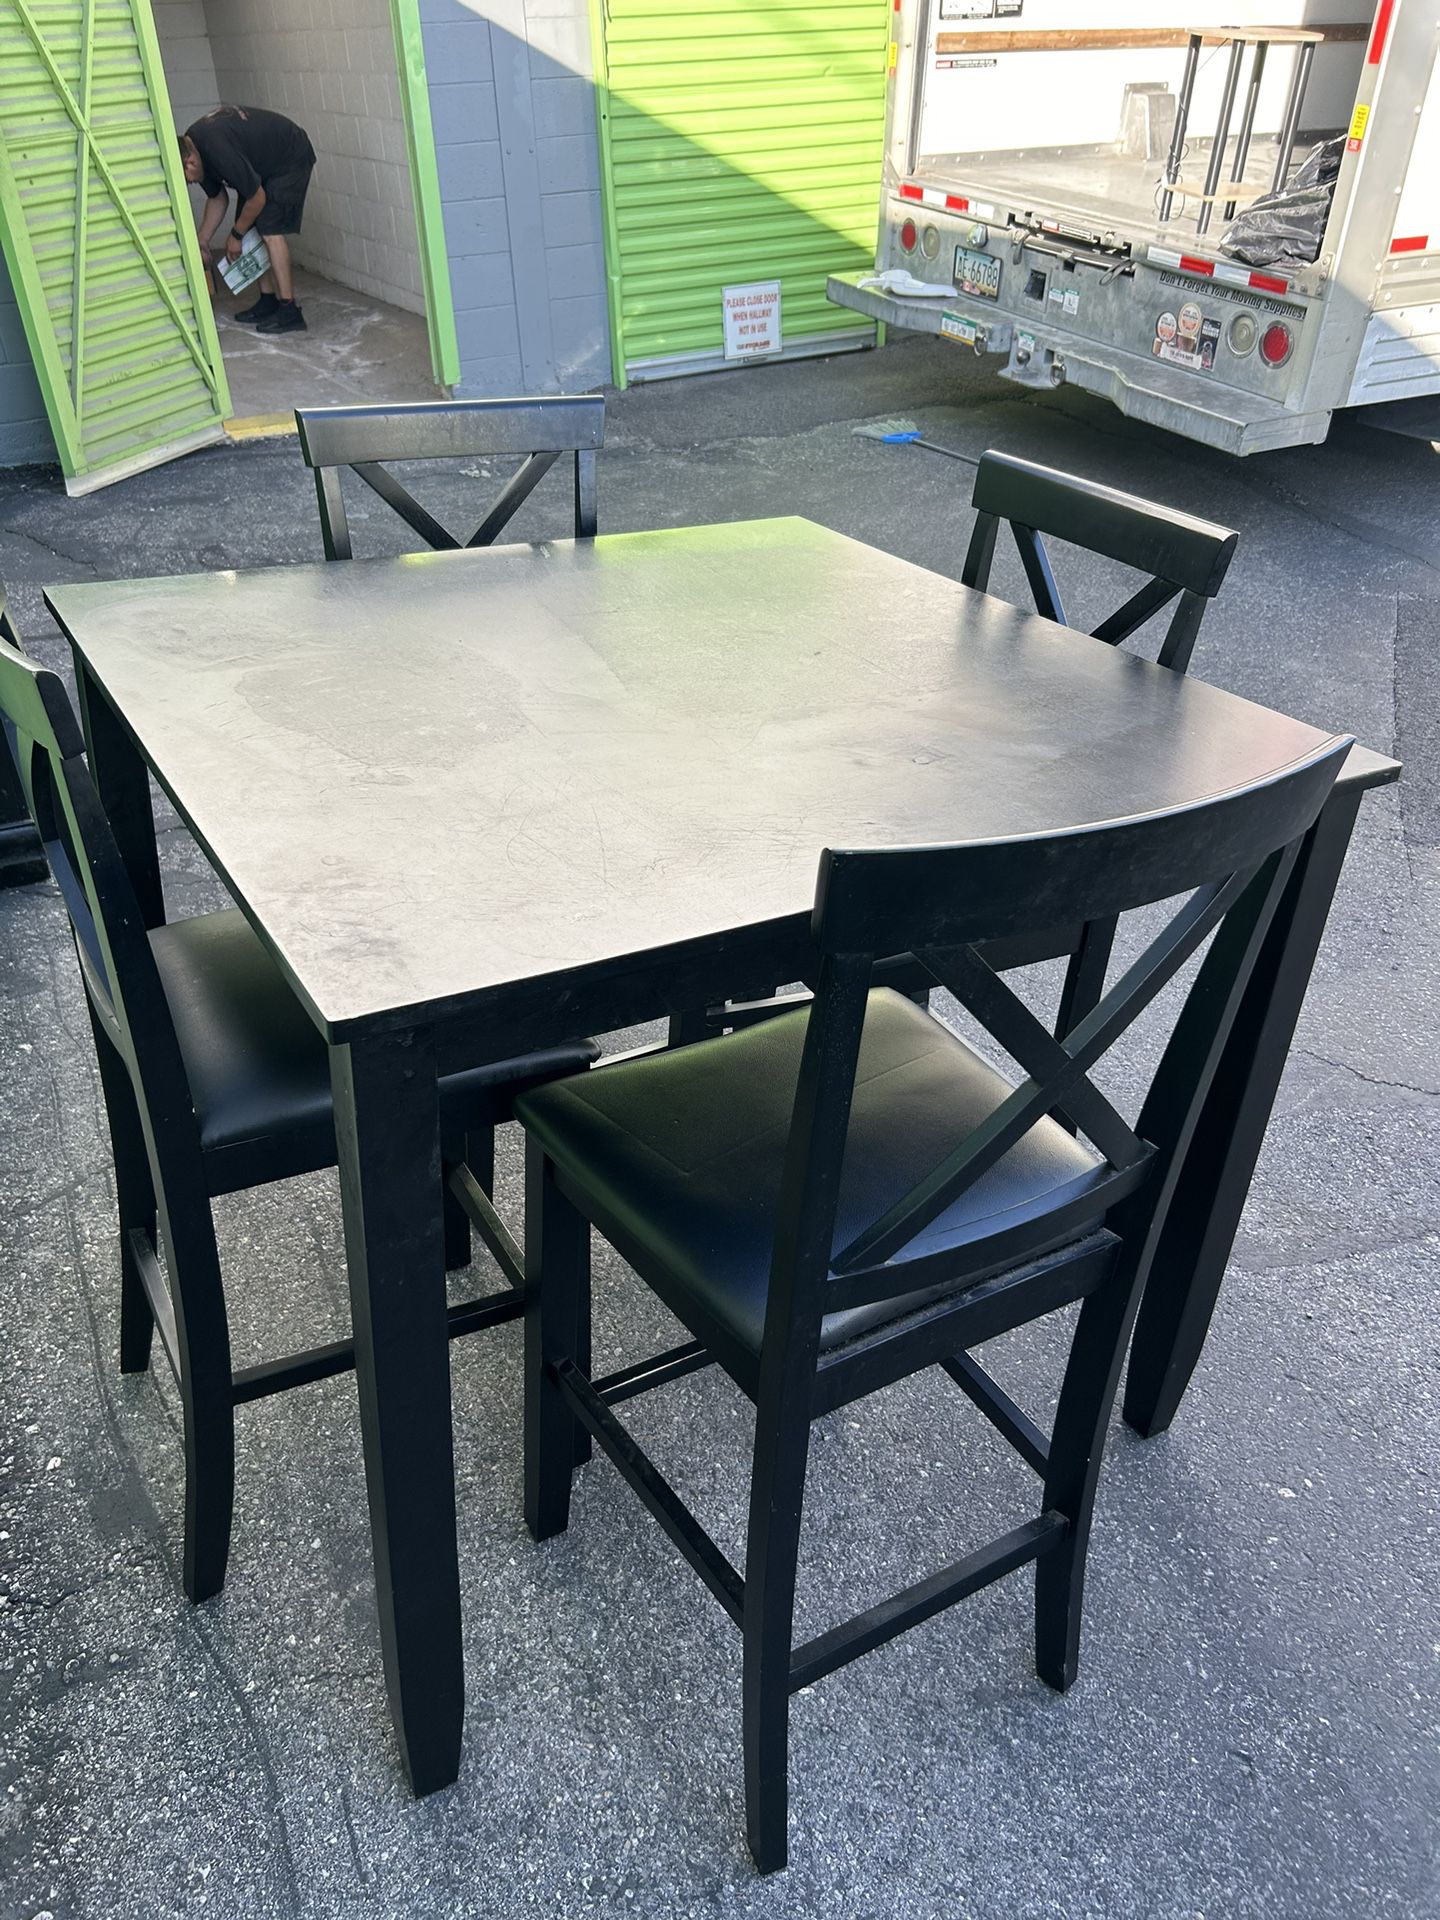 Pub Table With 4 Chairs.